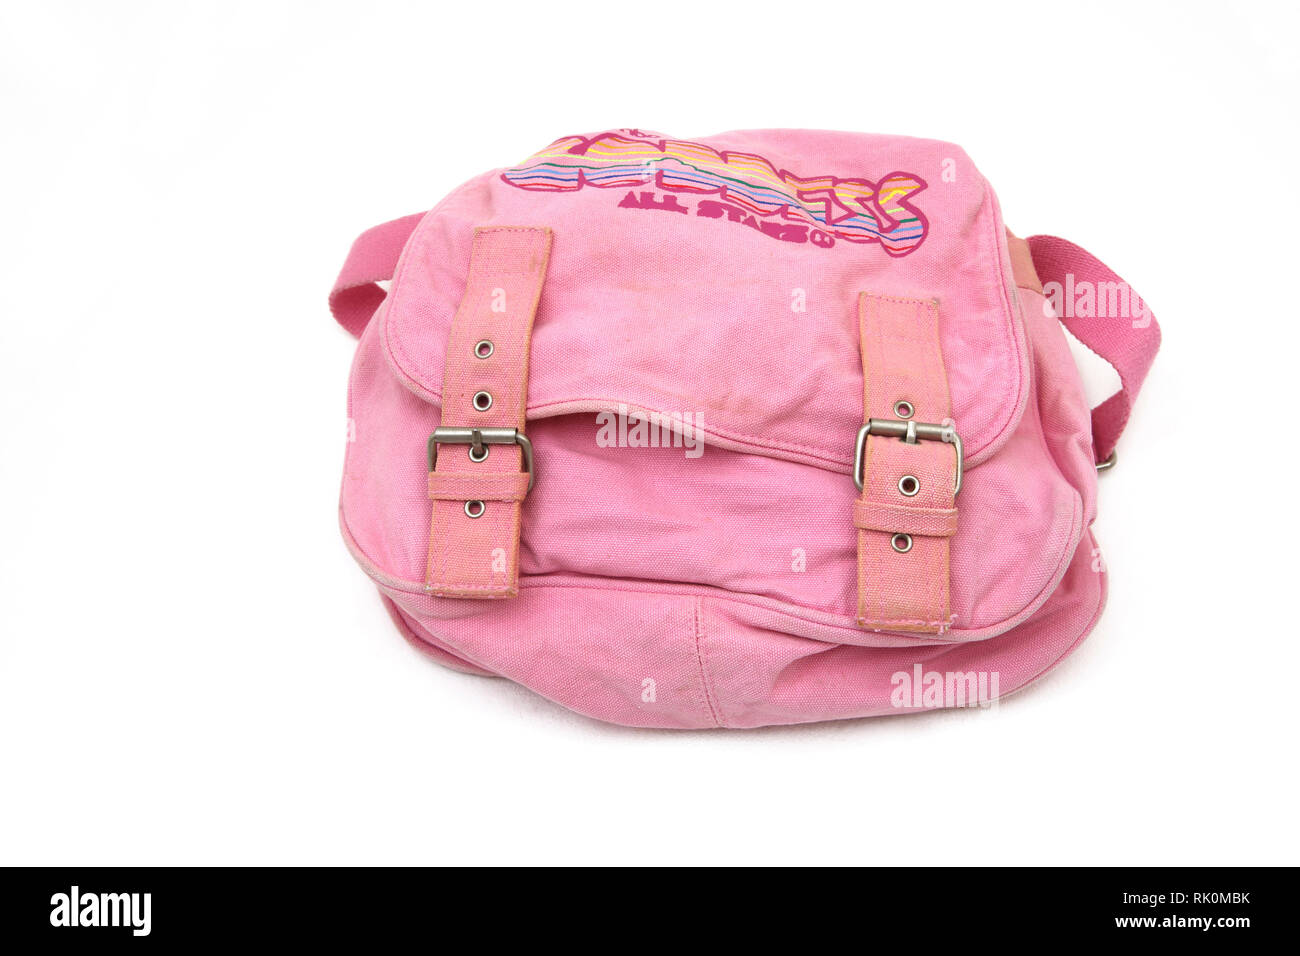 Pink Goddess All Stars Satchel Bag with Magnetic clasps Stock Photo